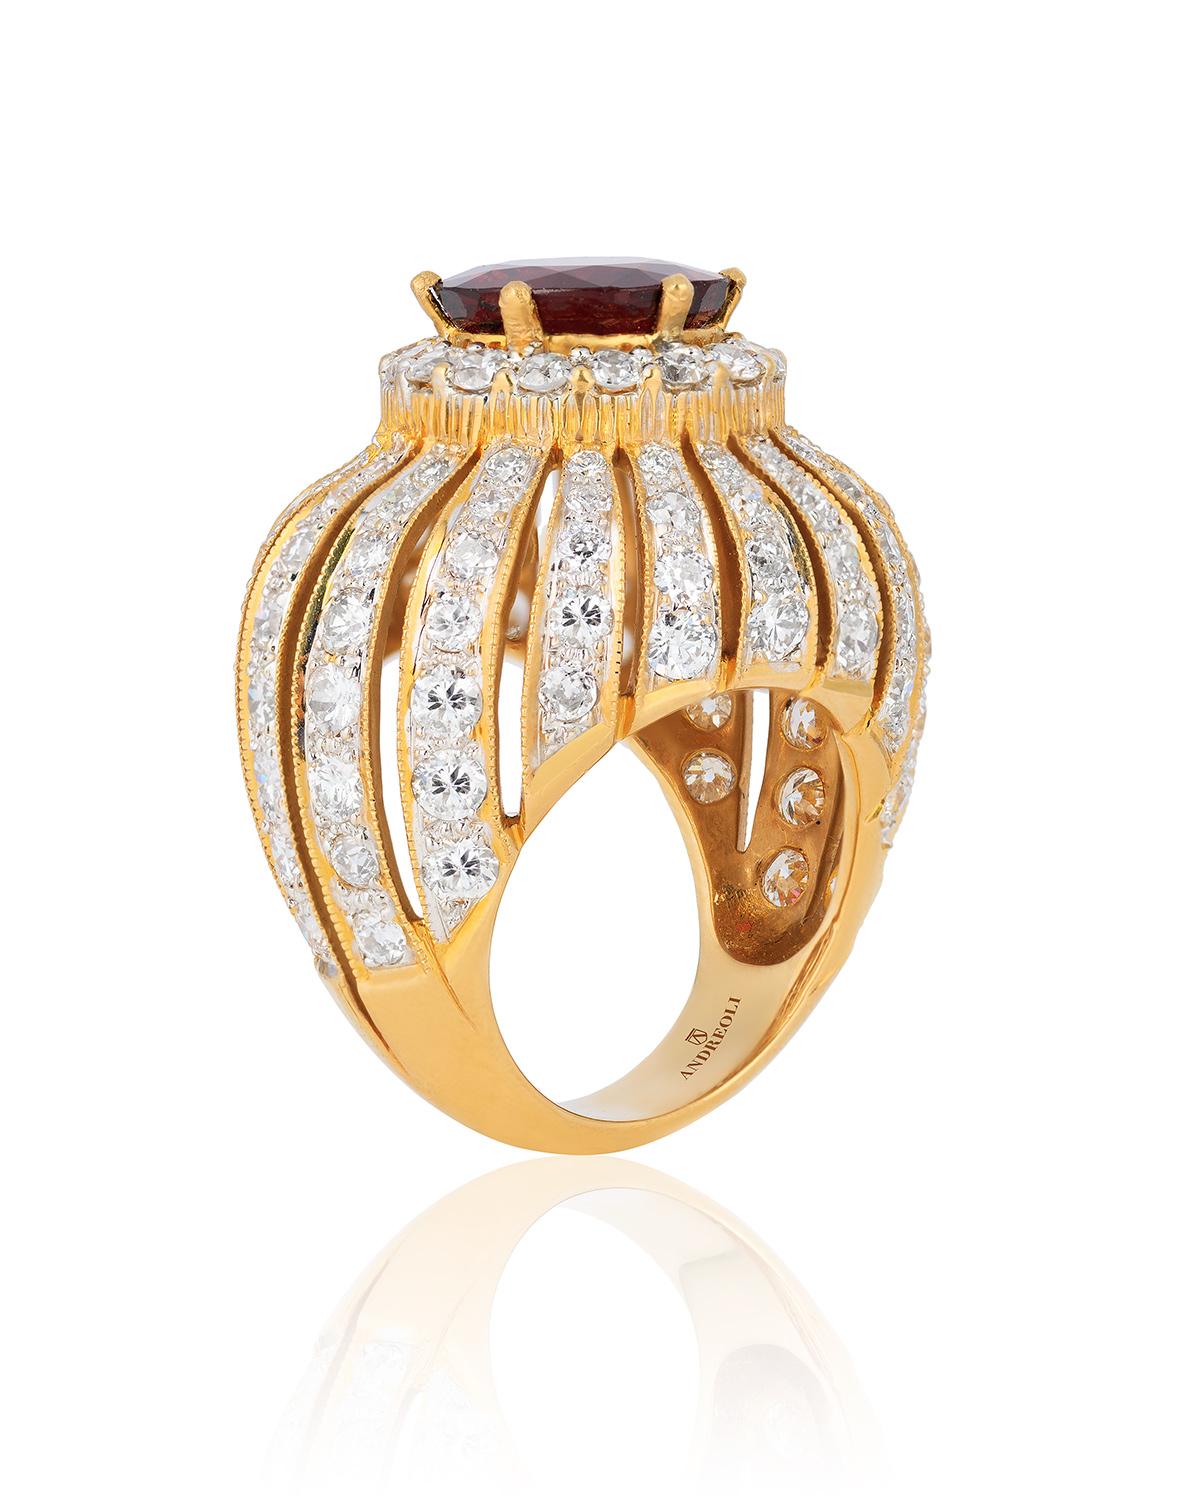 Contemporary Andreoli Diamond Red Spinel Cocktail Ring 18 Karat Yellow Gold